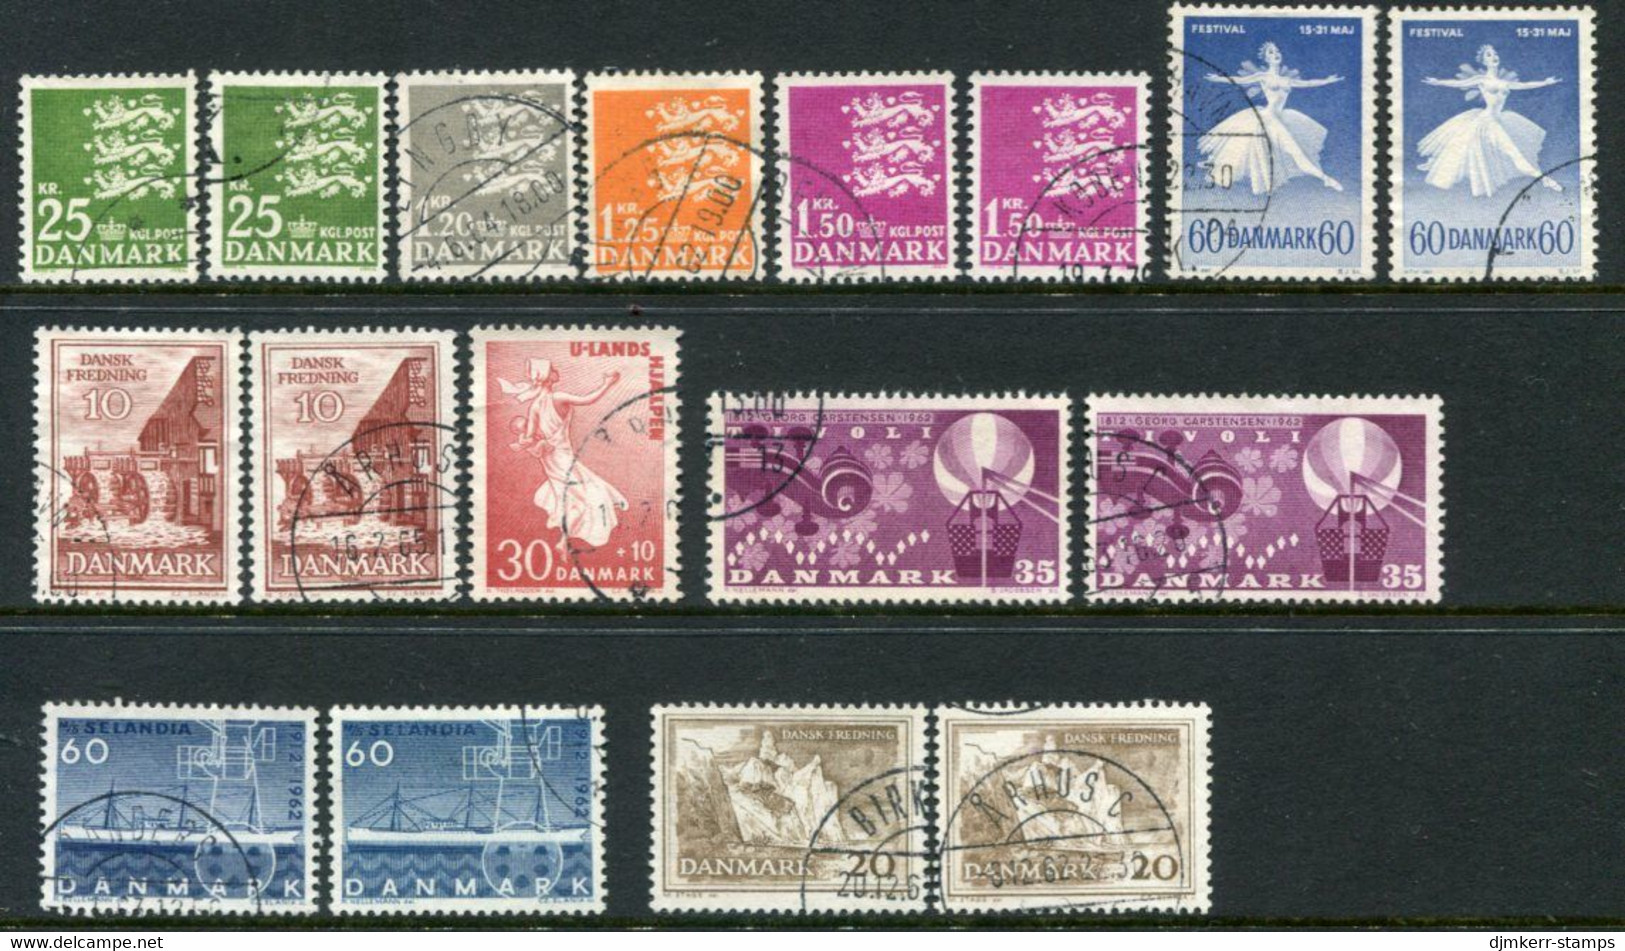 DENMARK 1962 Complete Issues With Ordinary And Fluorescent Papers, Used Michel 399x-408y - Used Stamps